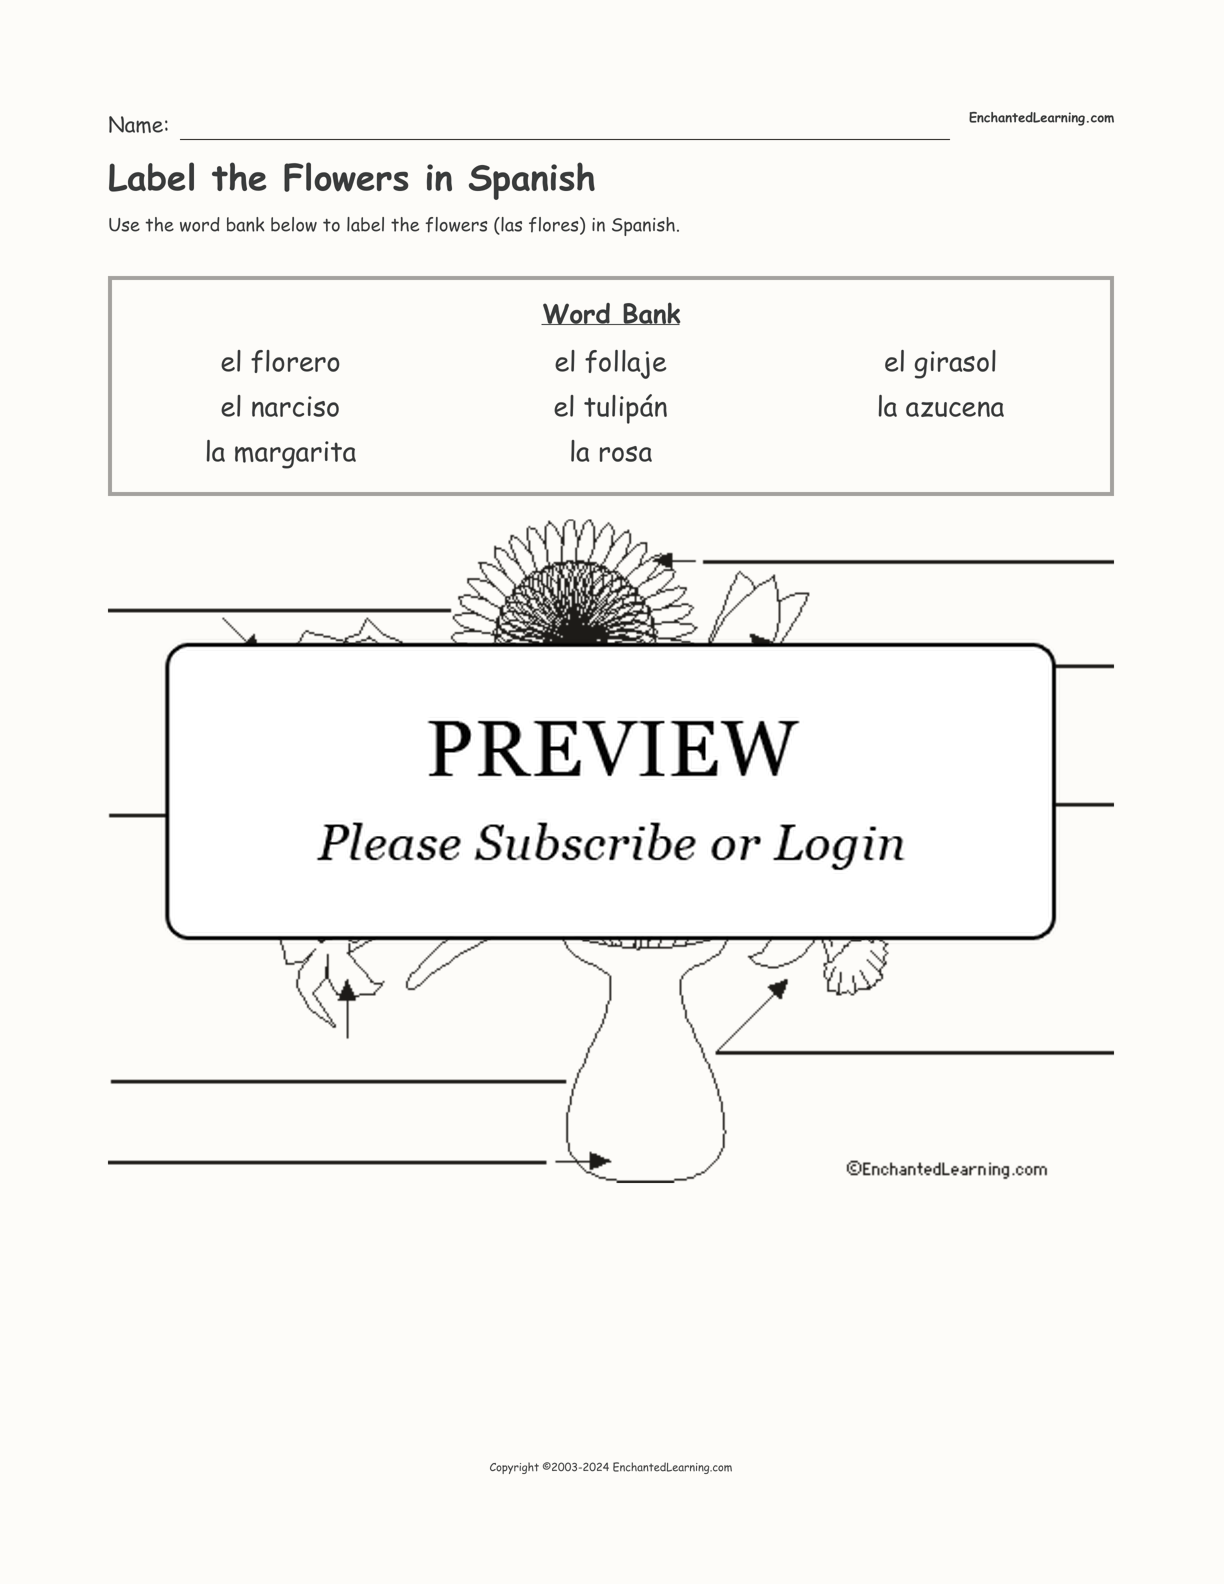 Label the Flowers in Spanish interactive worksheet page 1